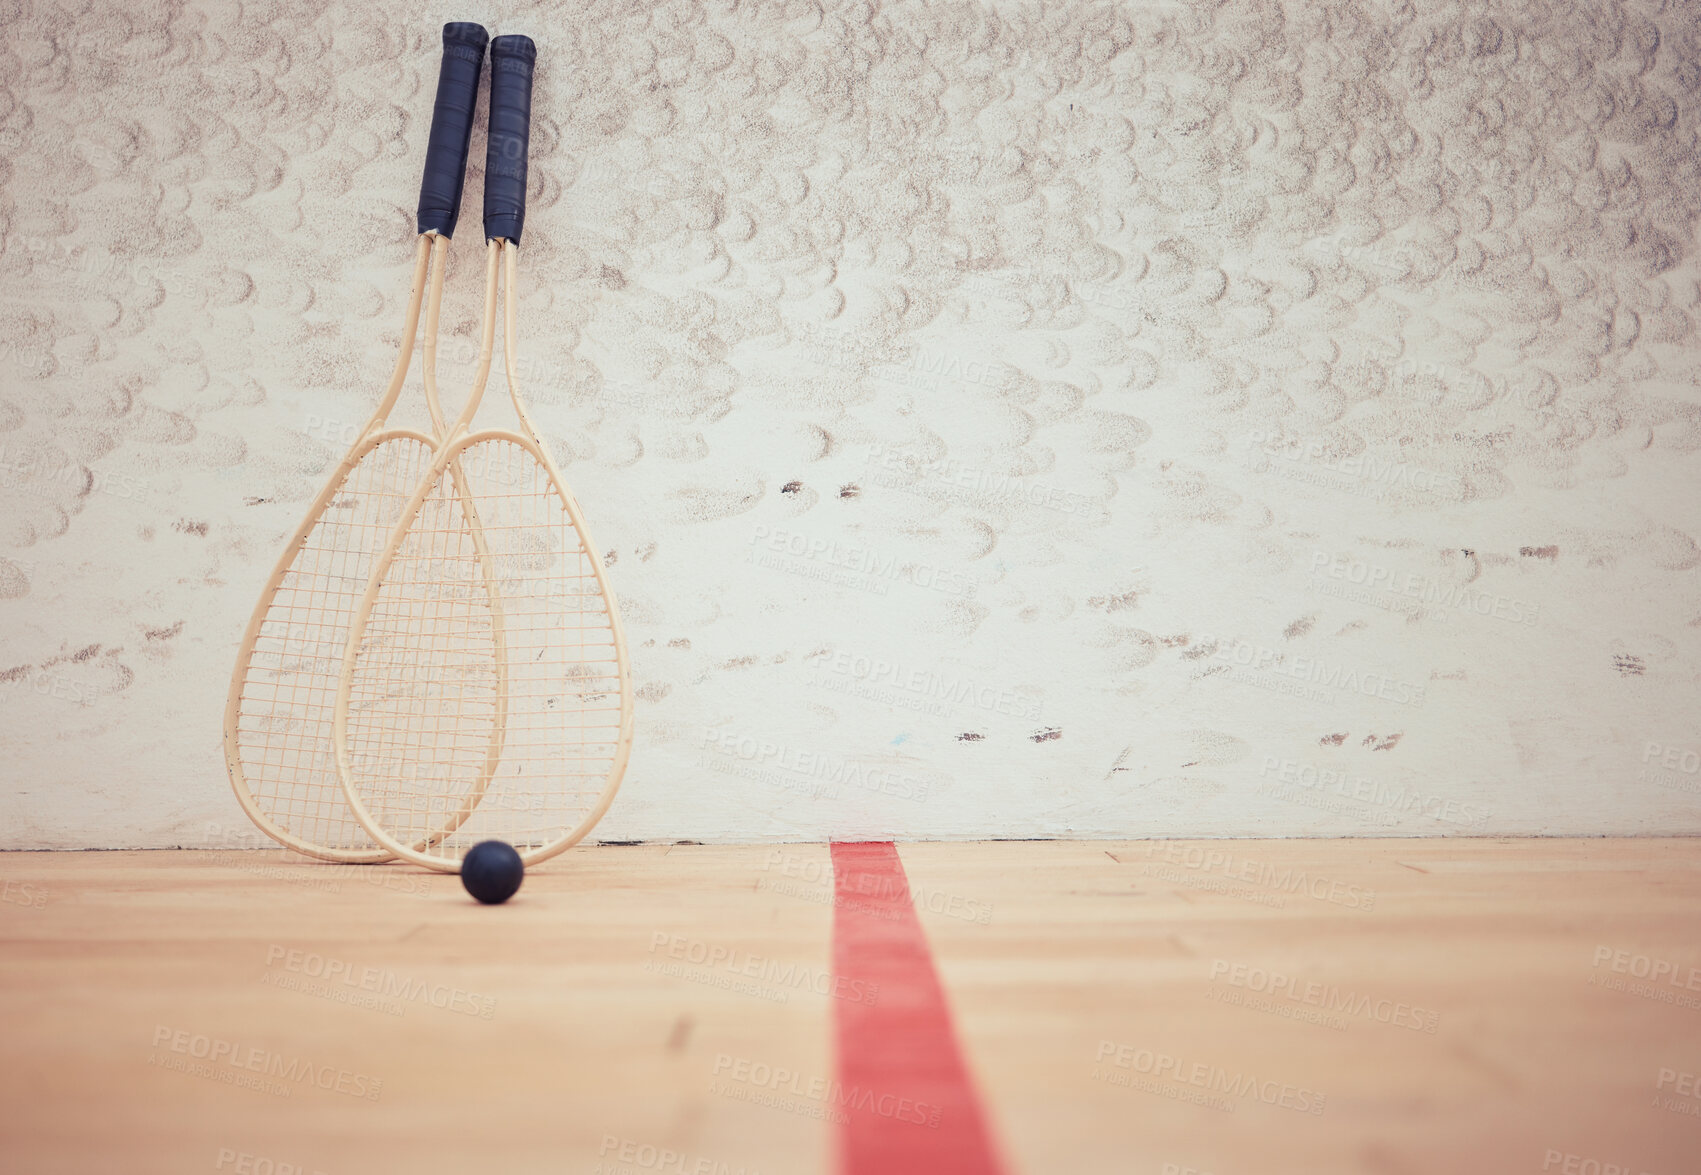 Buy stock photo Group of squash equipment and gear on wooden floor in empty court in sports centre with copyspace. Two rackets and ball arranged in sporty arena with nobody before championship game and competition